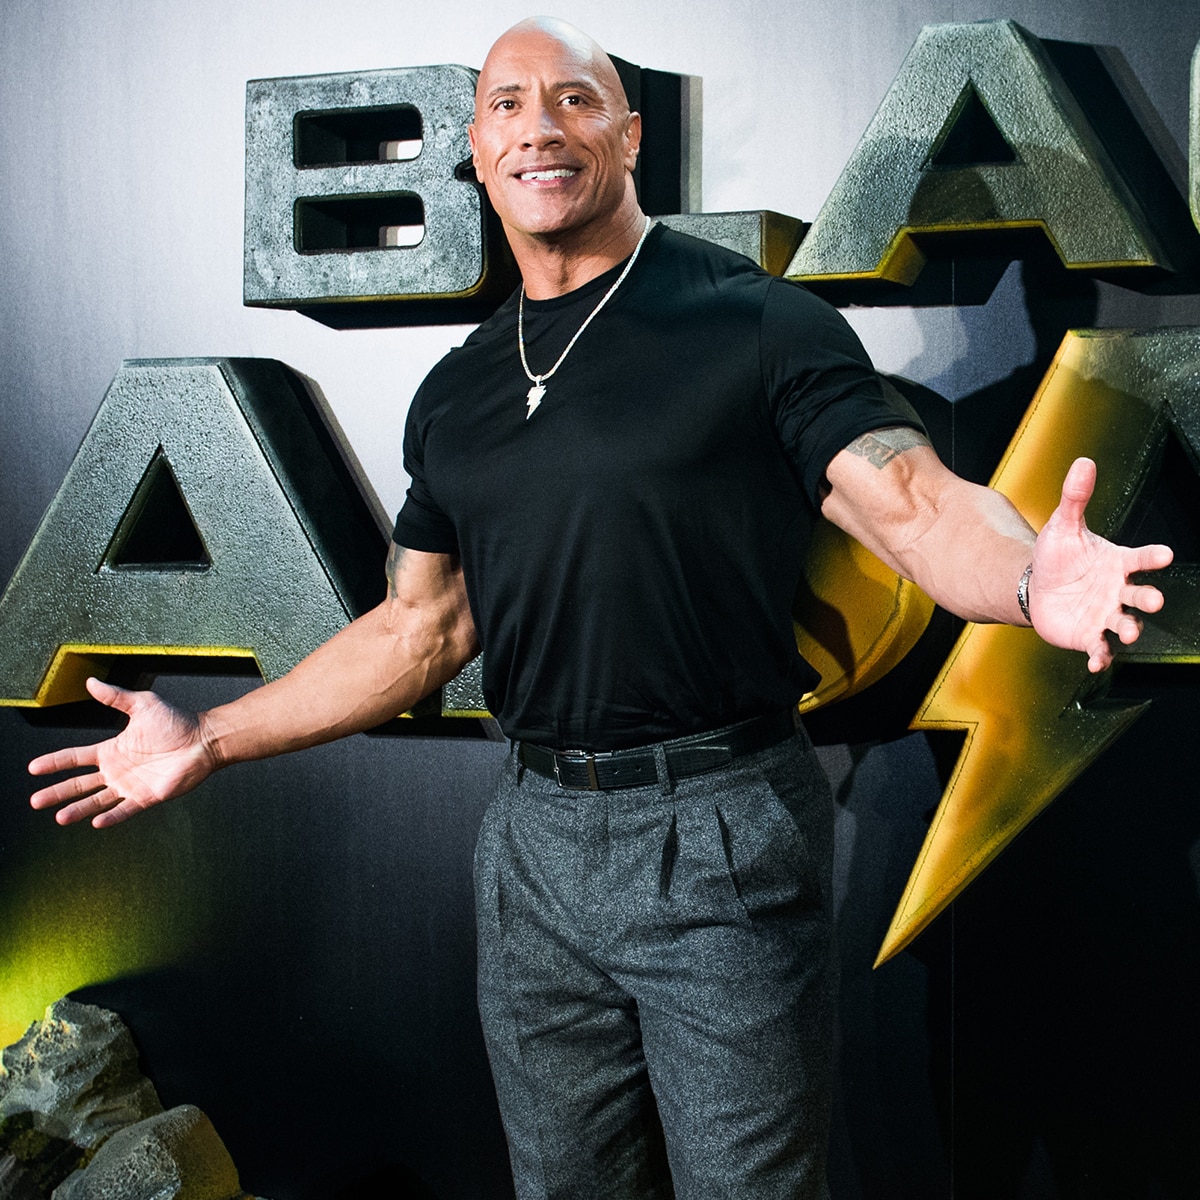 Dwayne 'The Rock' Johnson in the ring, pulling a very tense pose. :  r/photoshopbattles